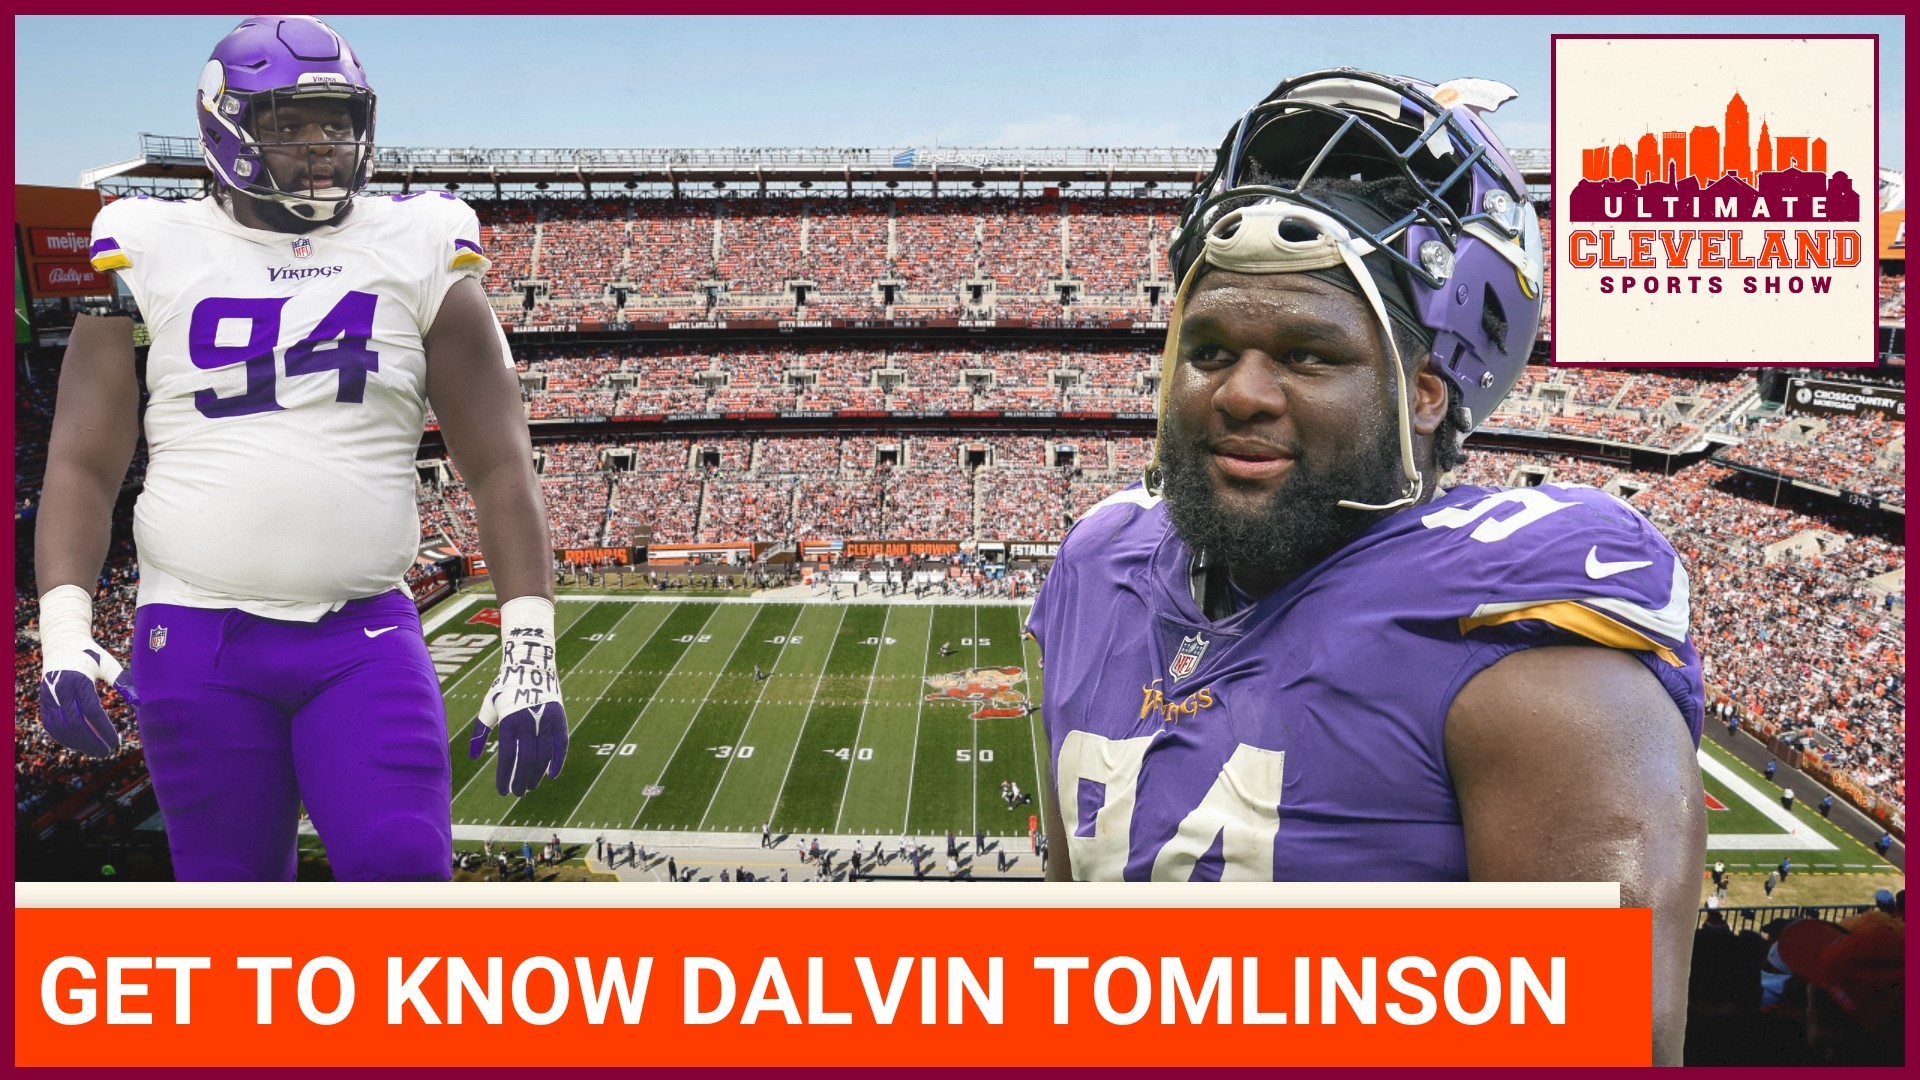 Watch the UCSS crew give fun facts about the newest Cleveland Browns player, Dalvin Tomlinson